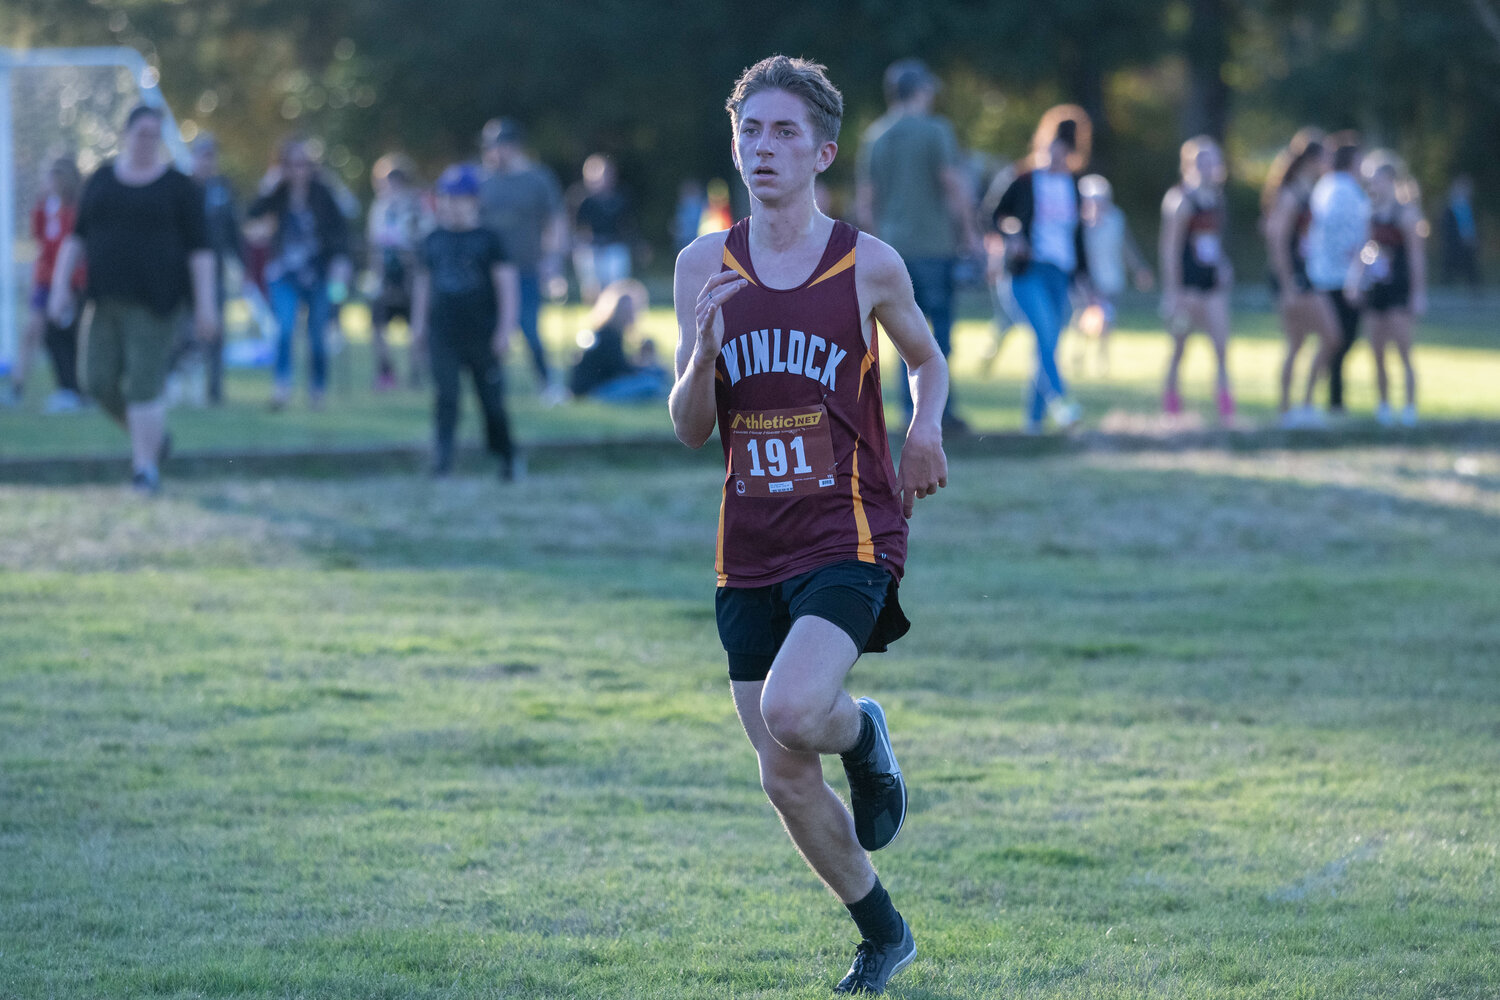 Winlock's Chase Trodahl comes in to finish third in the boys' race at the C2BL championship meet in Onalaska on Oct. 19.